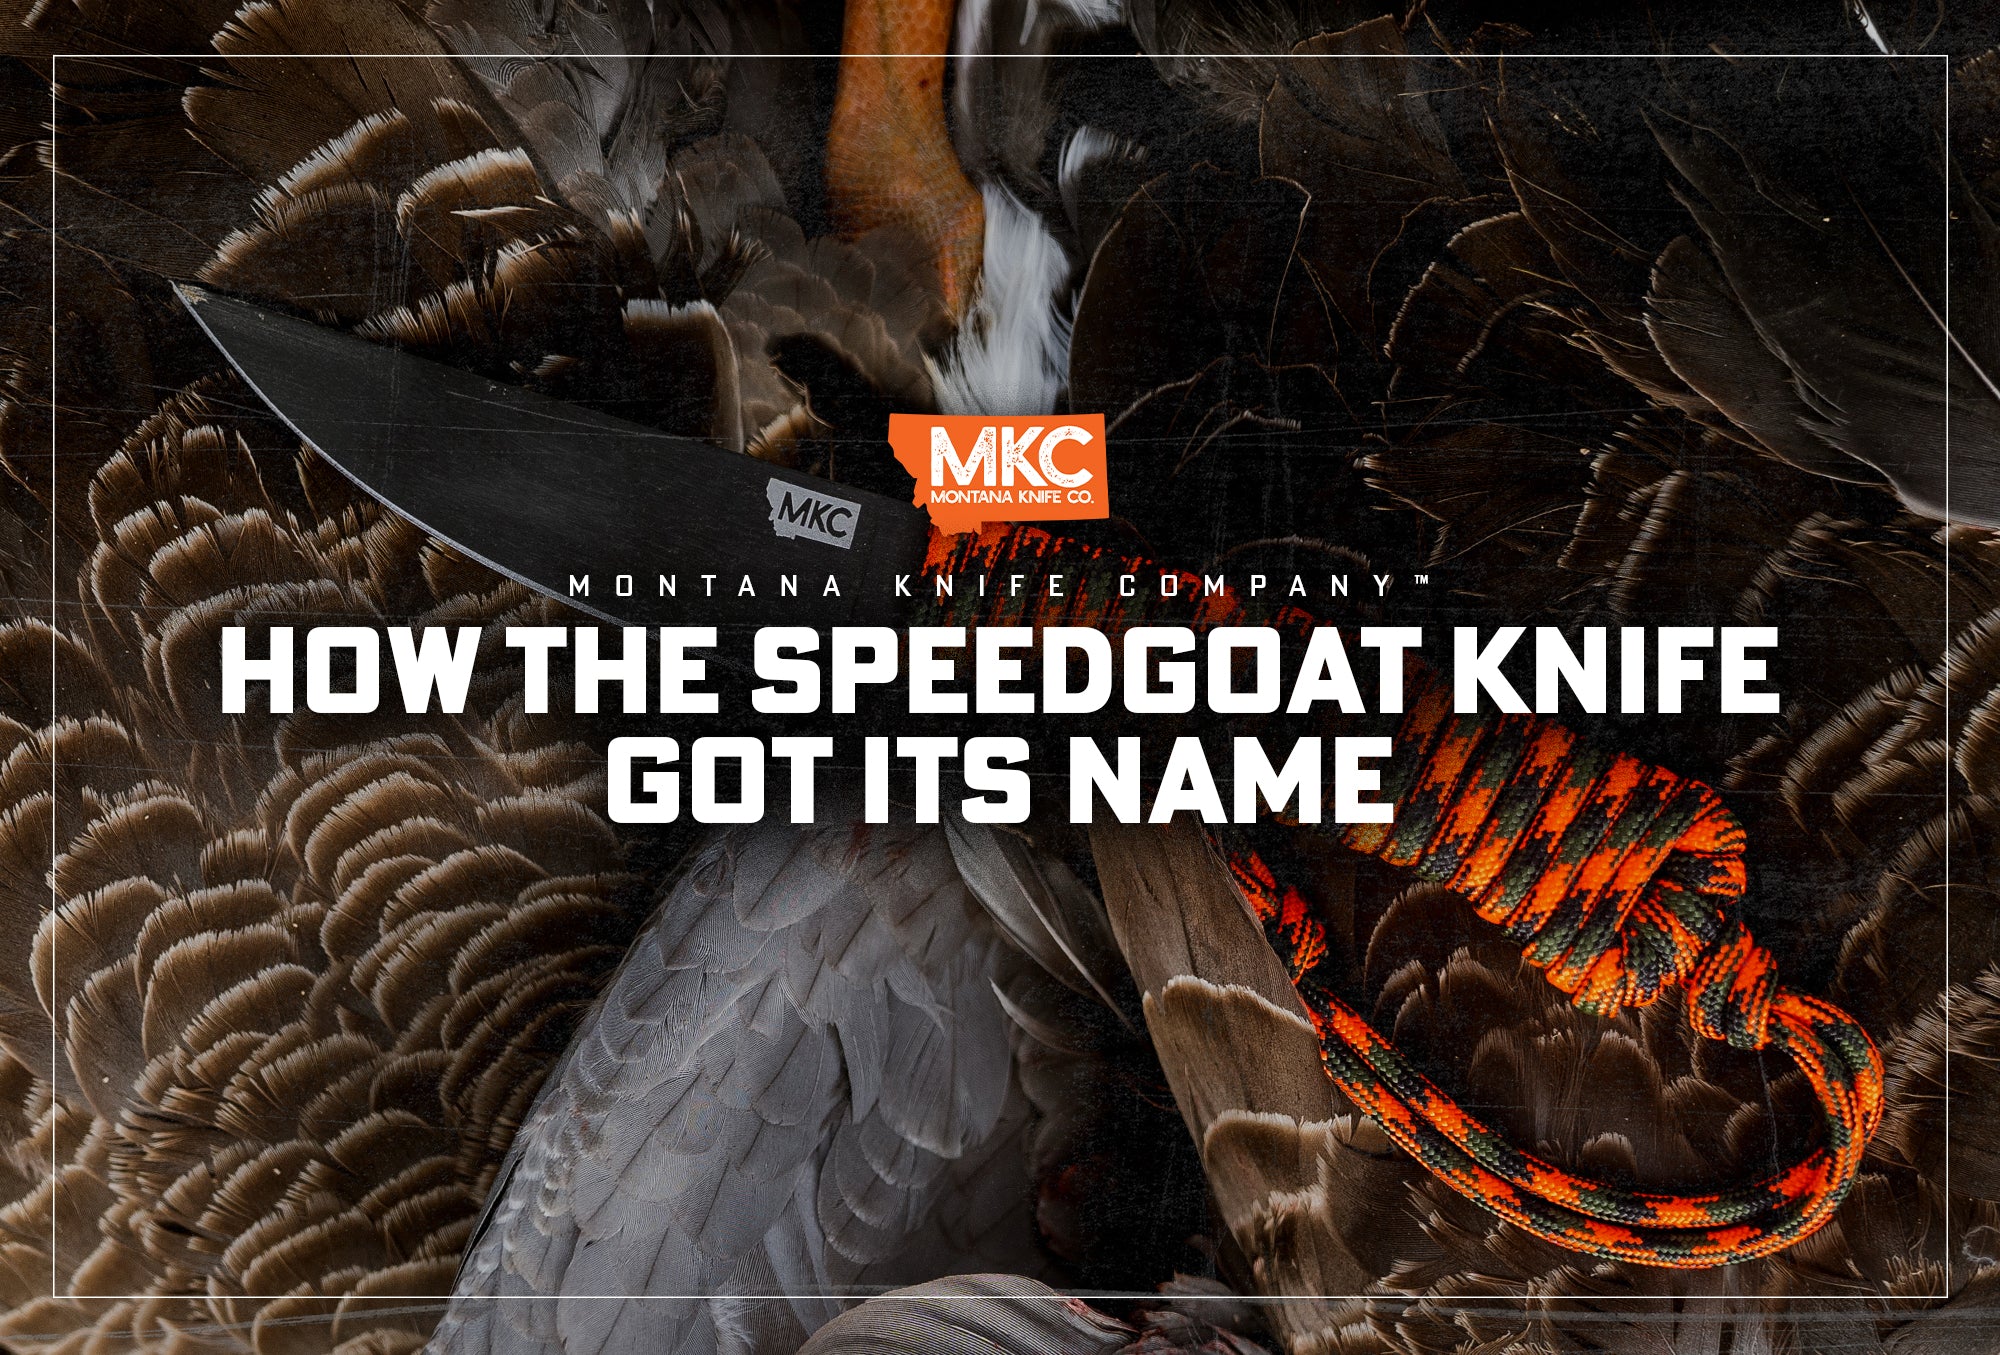 A dark Speadgoat blade with a neon orange paracord handle sits diagonally across the feathers of a bird.